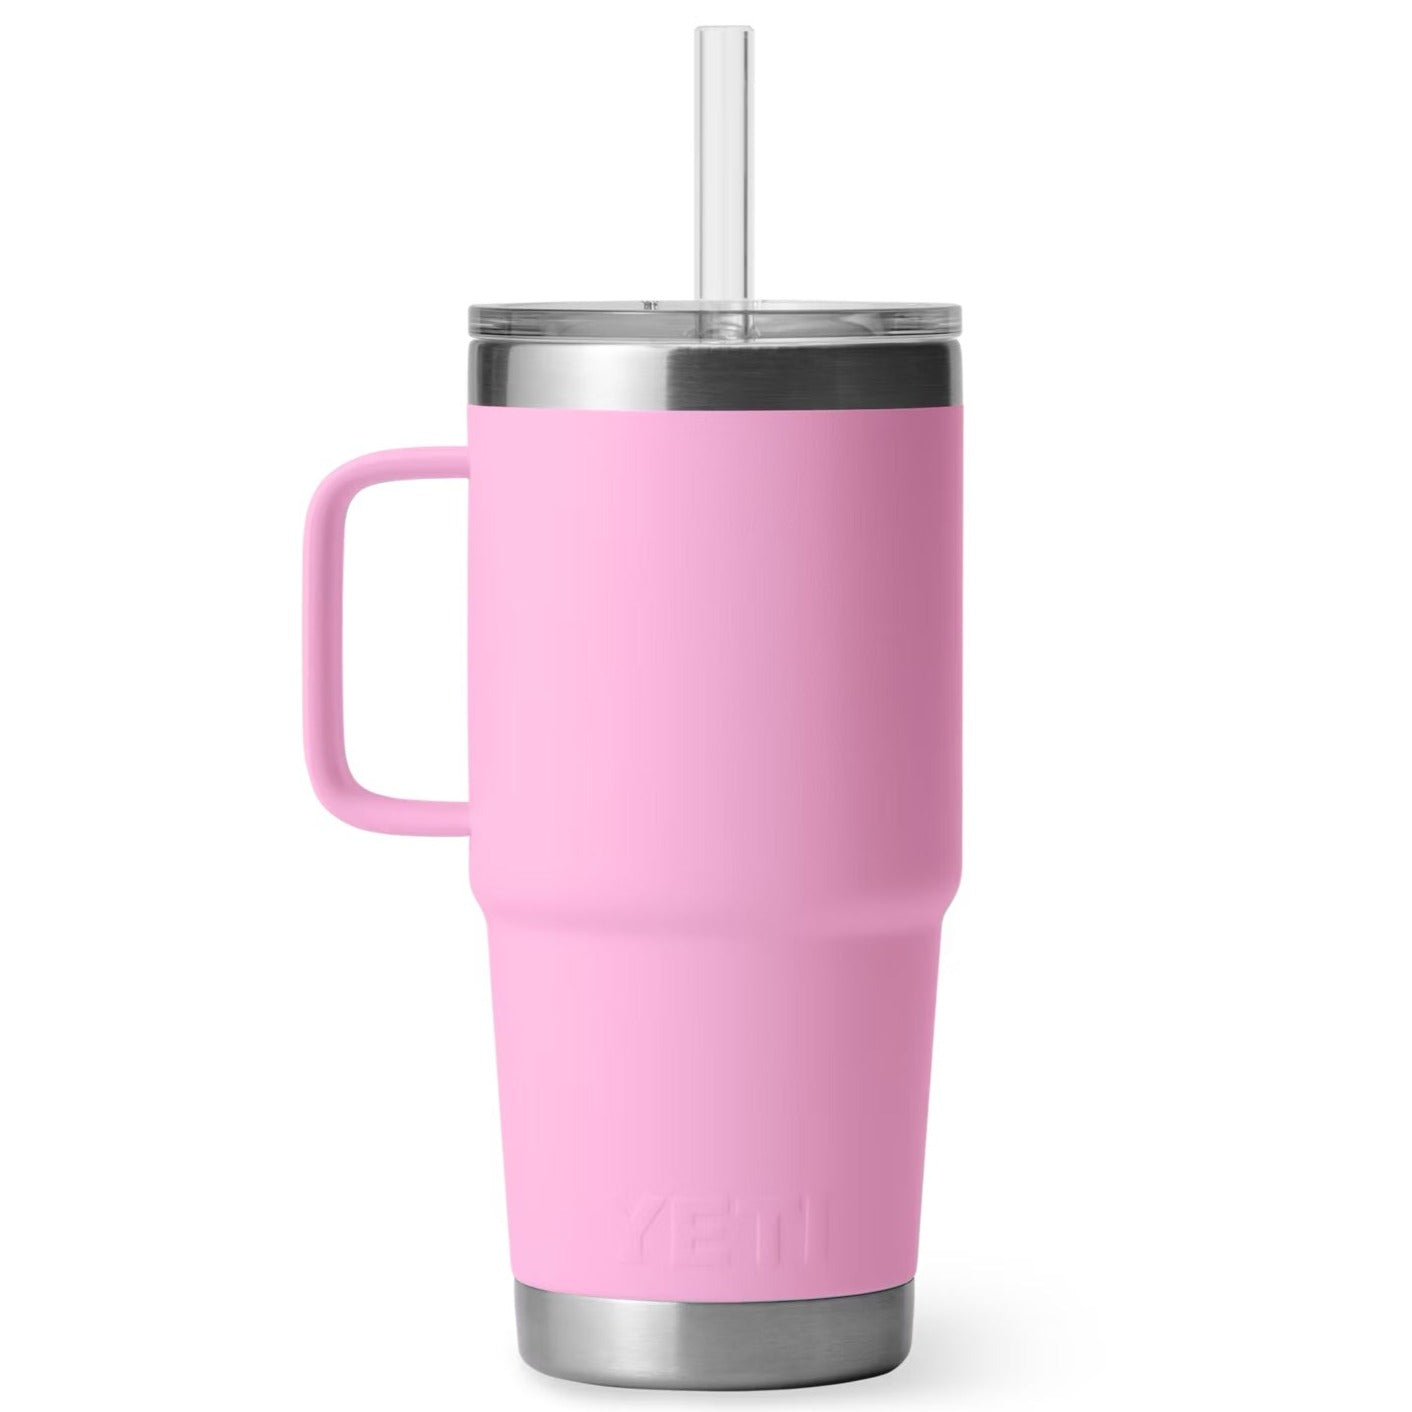 Yeti's pink mugs & tumblers are back in stock — shop them before